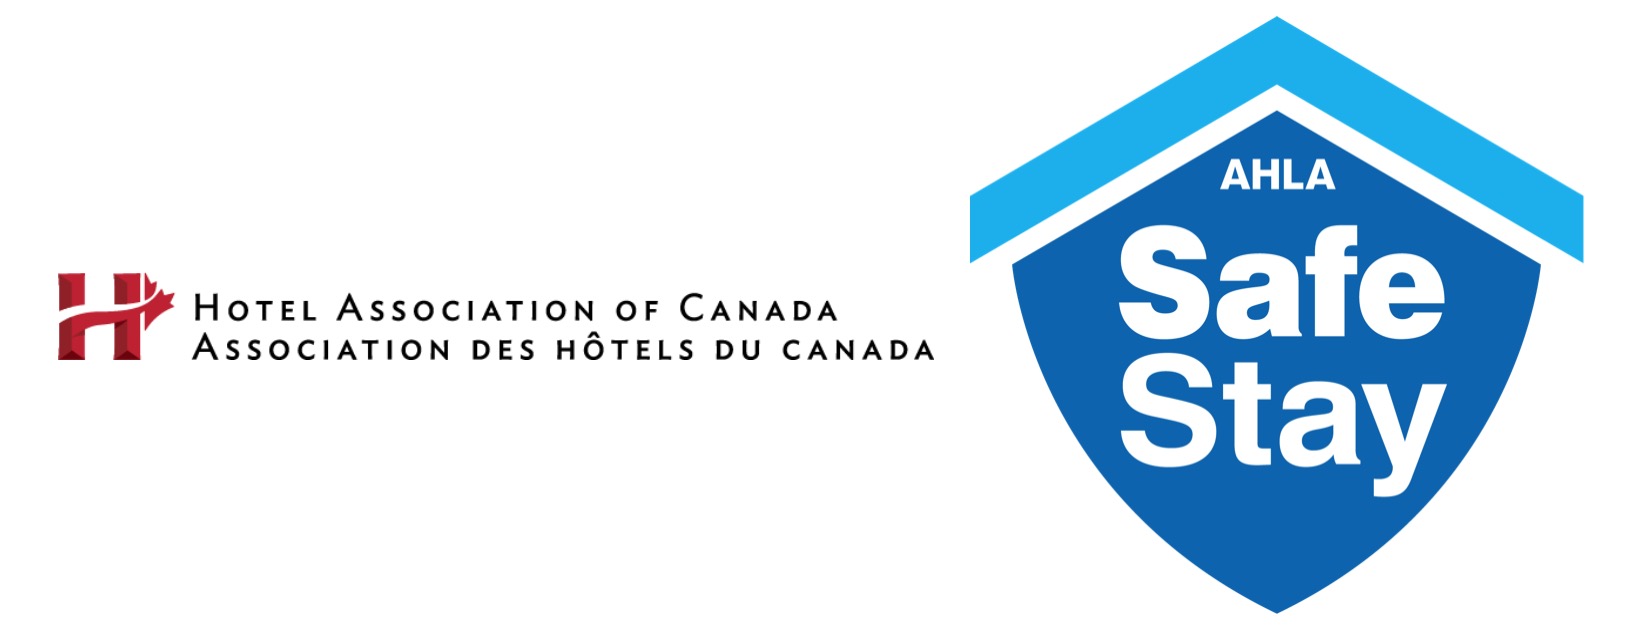 Hotel Association of Canada, Thursday, May 21, 2020, Press release picture